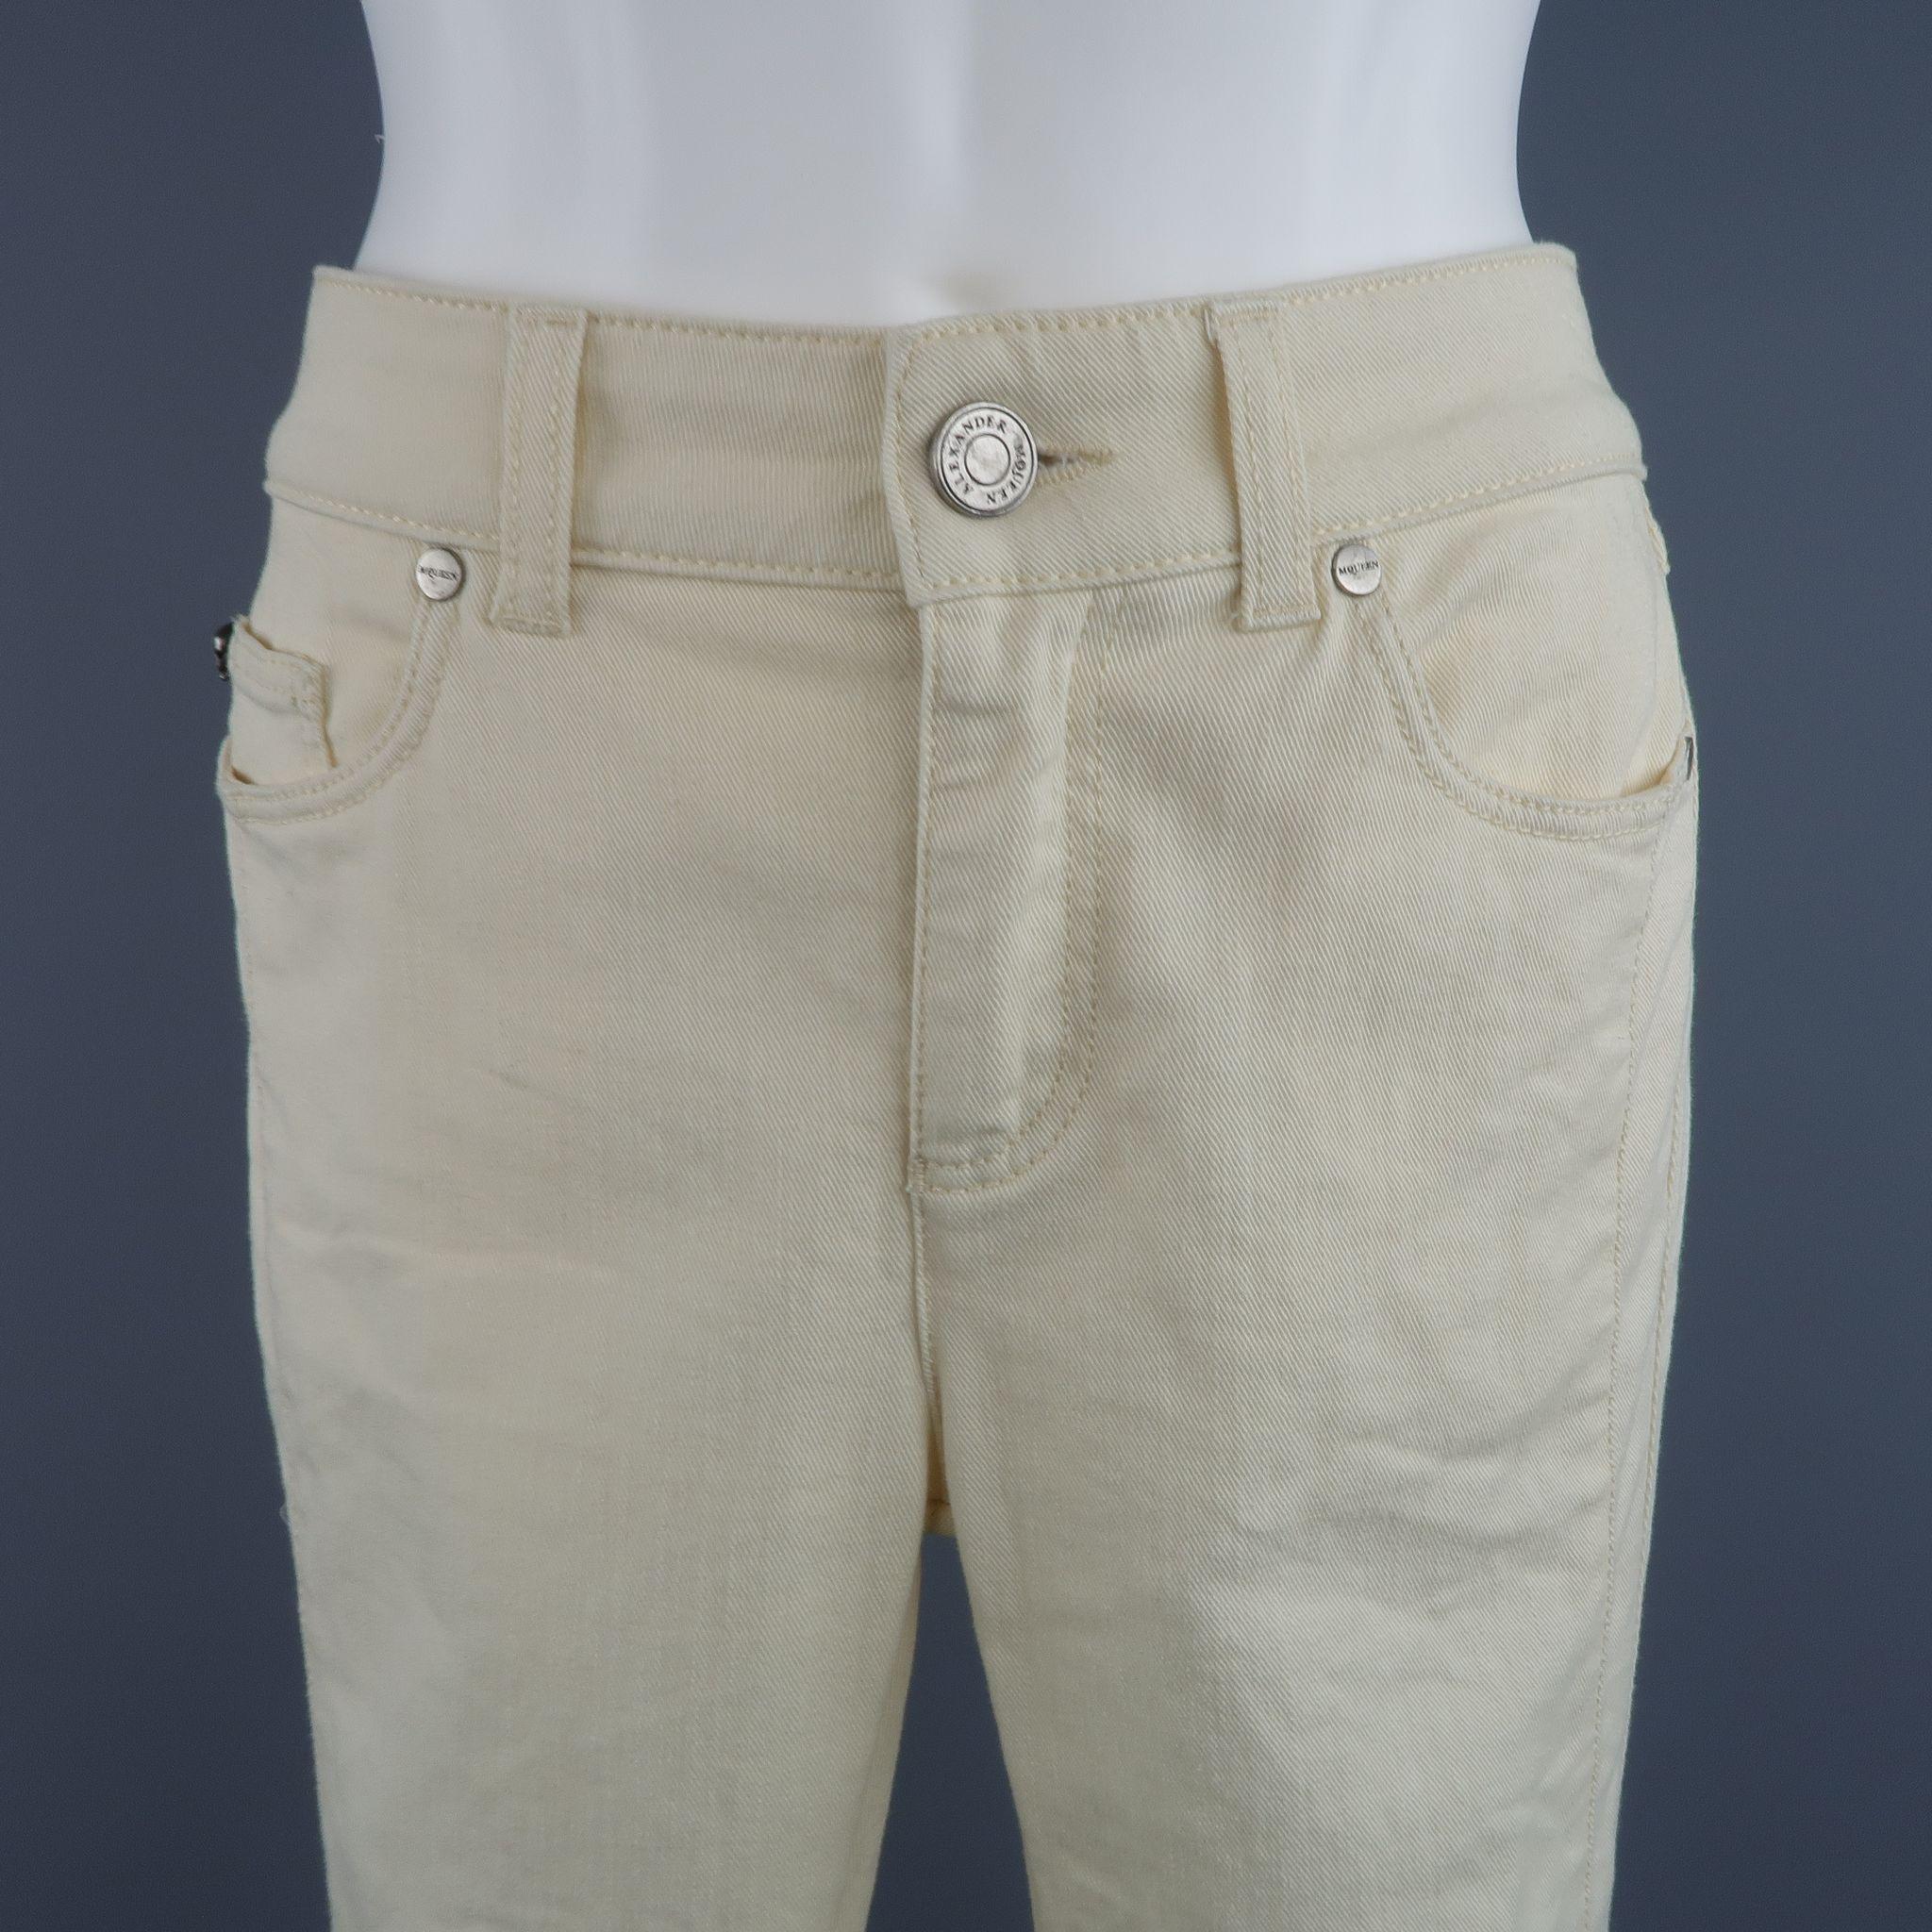 ALEXANDER MCQUEEN skinny jeans come in a creamy beige stretch denim twill and feature a thick side stripe and dark silver tone engraved skull hardware. Made in Italy.

Excellent Pre-Owned Condition.
Marked: EU 40

Measurements:

 Waist: 29 in.
 Hip: